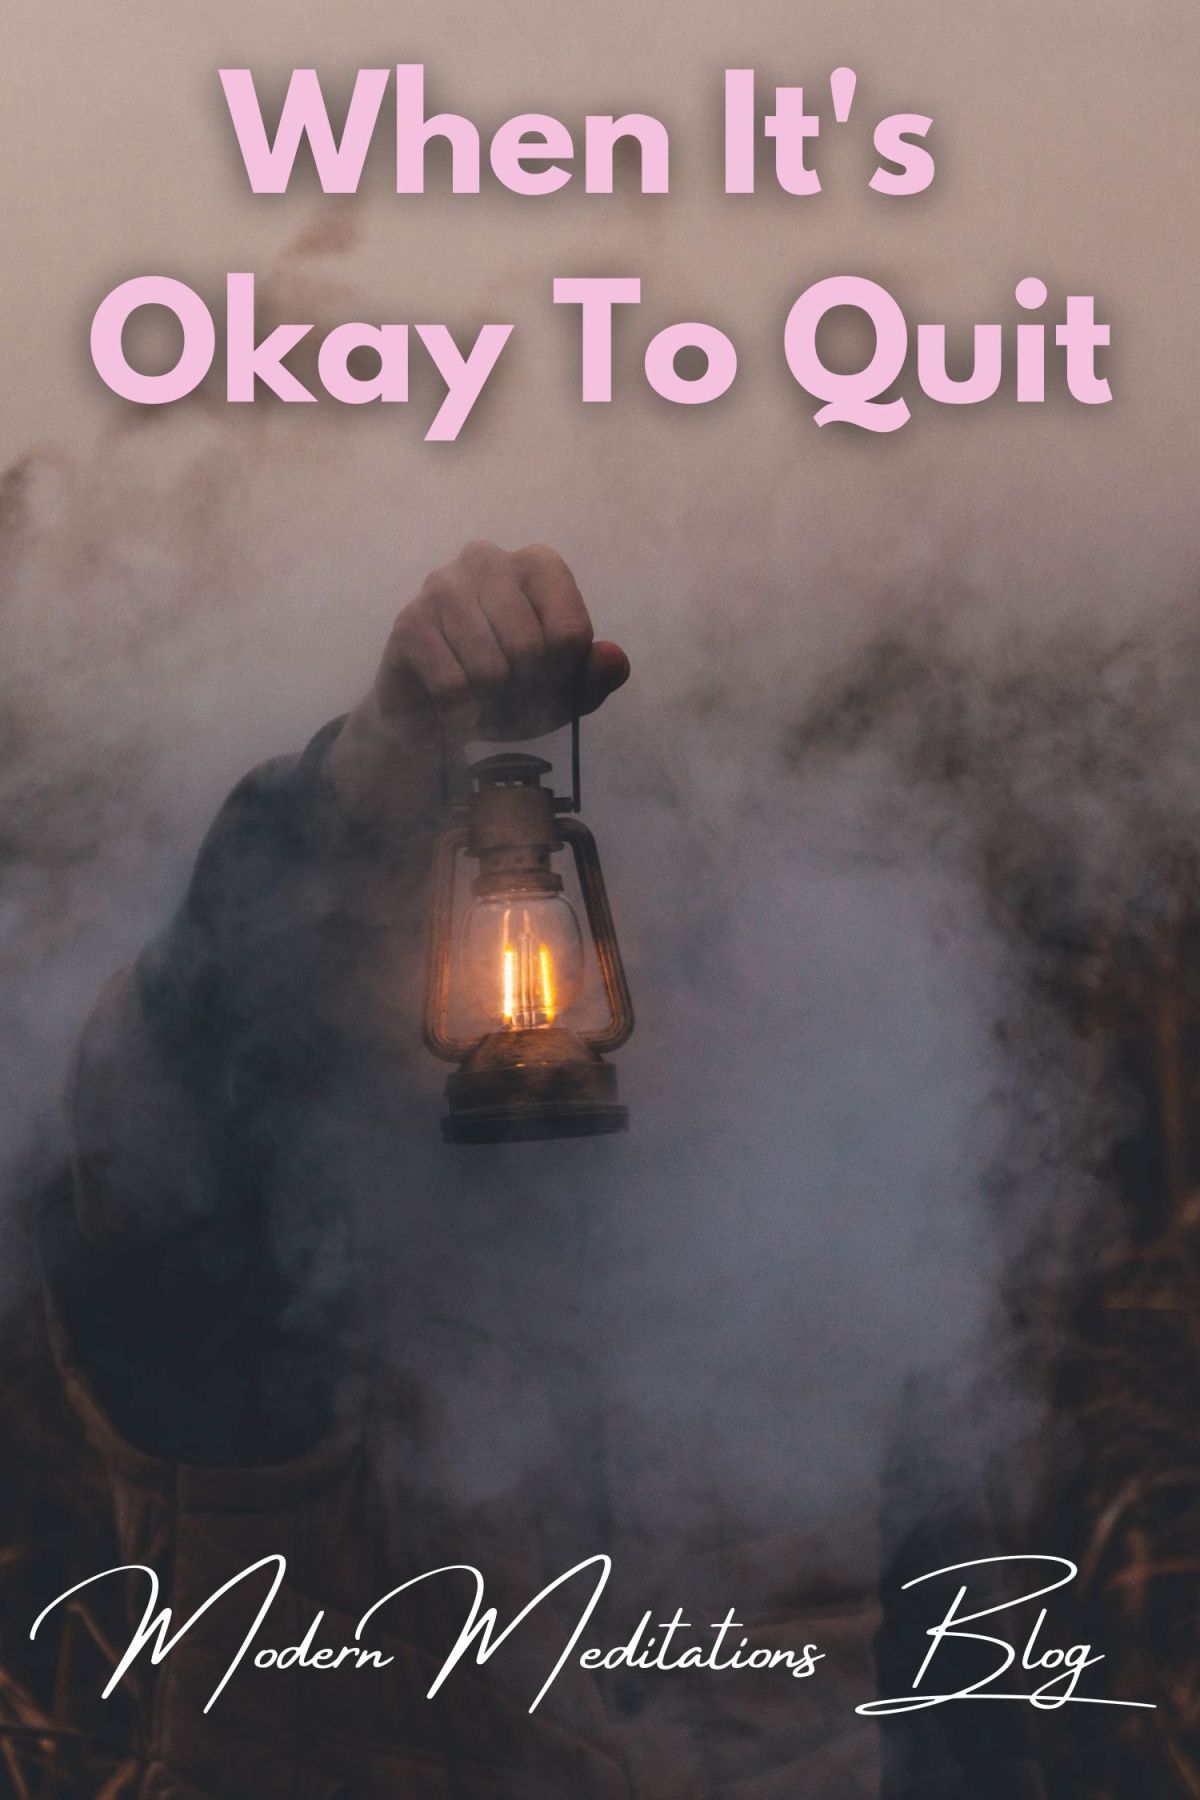 When Is It OK To Quit?